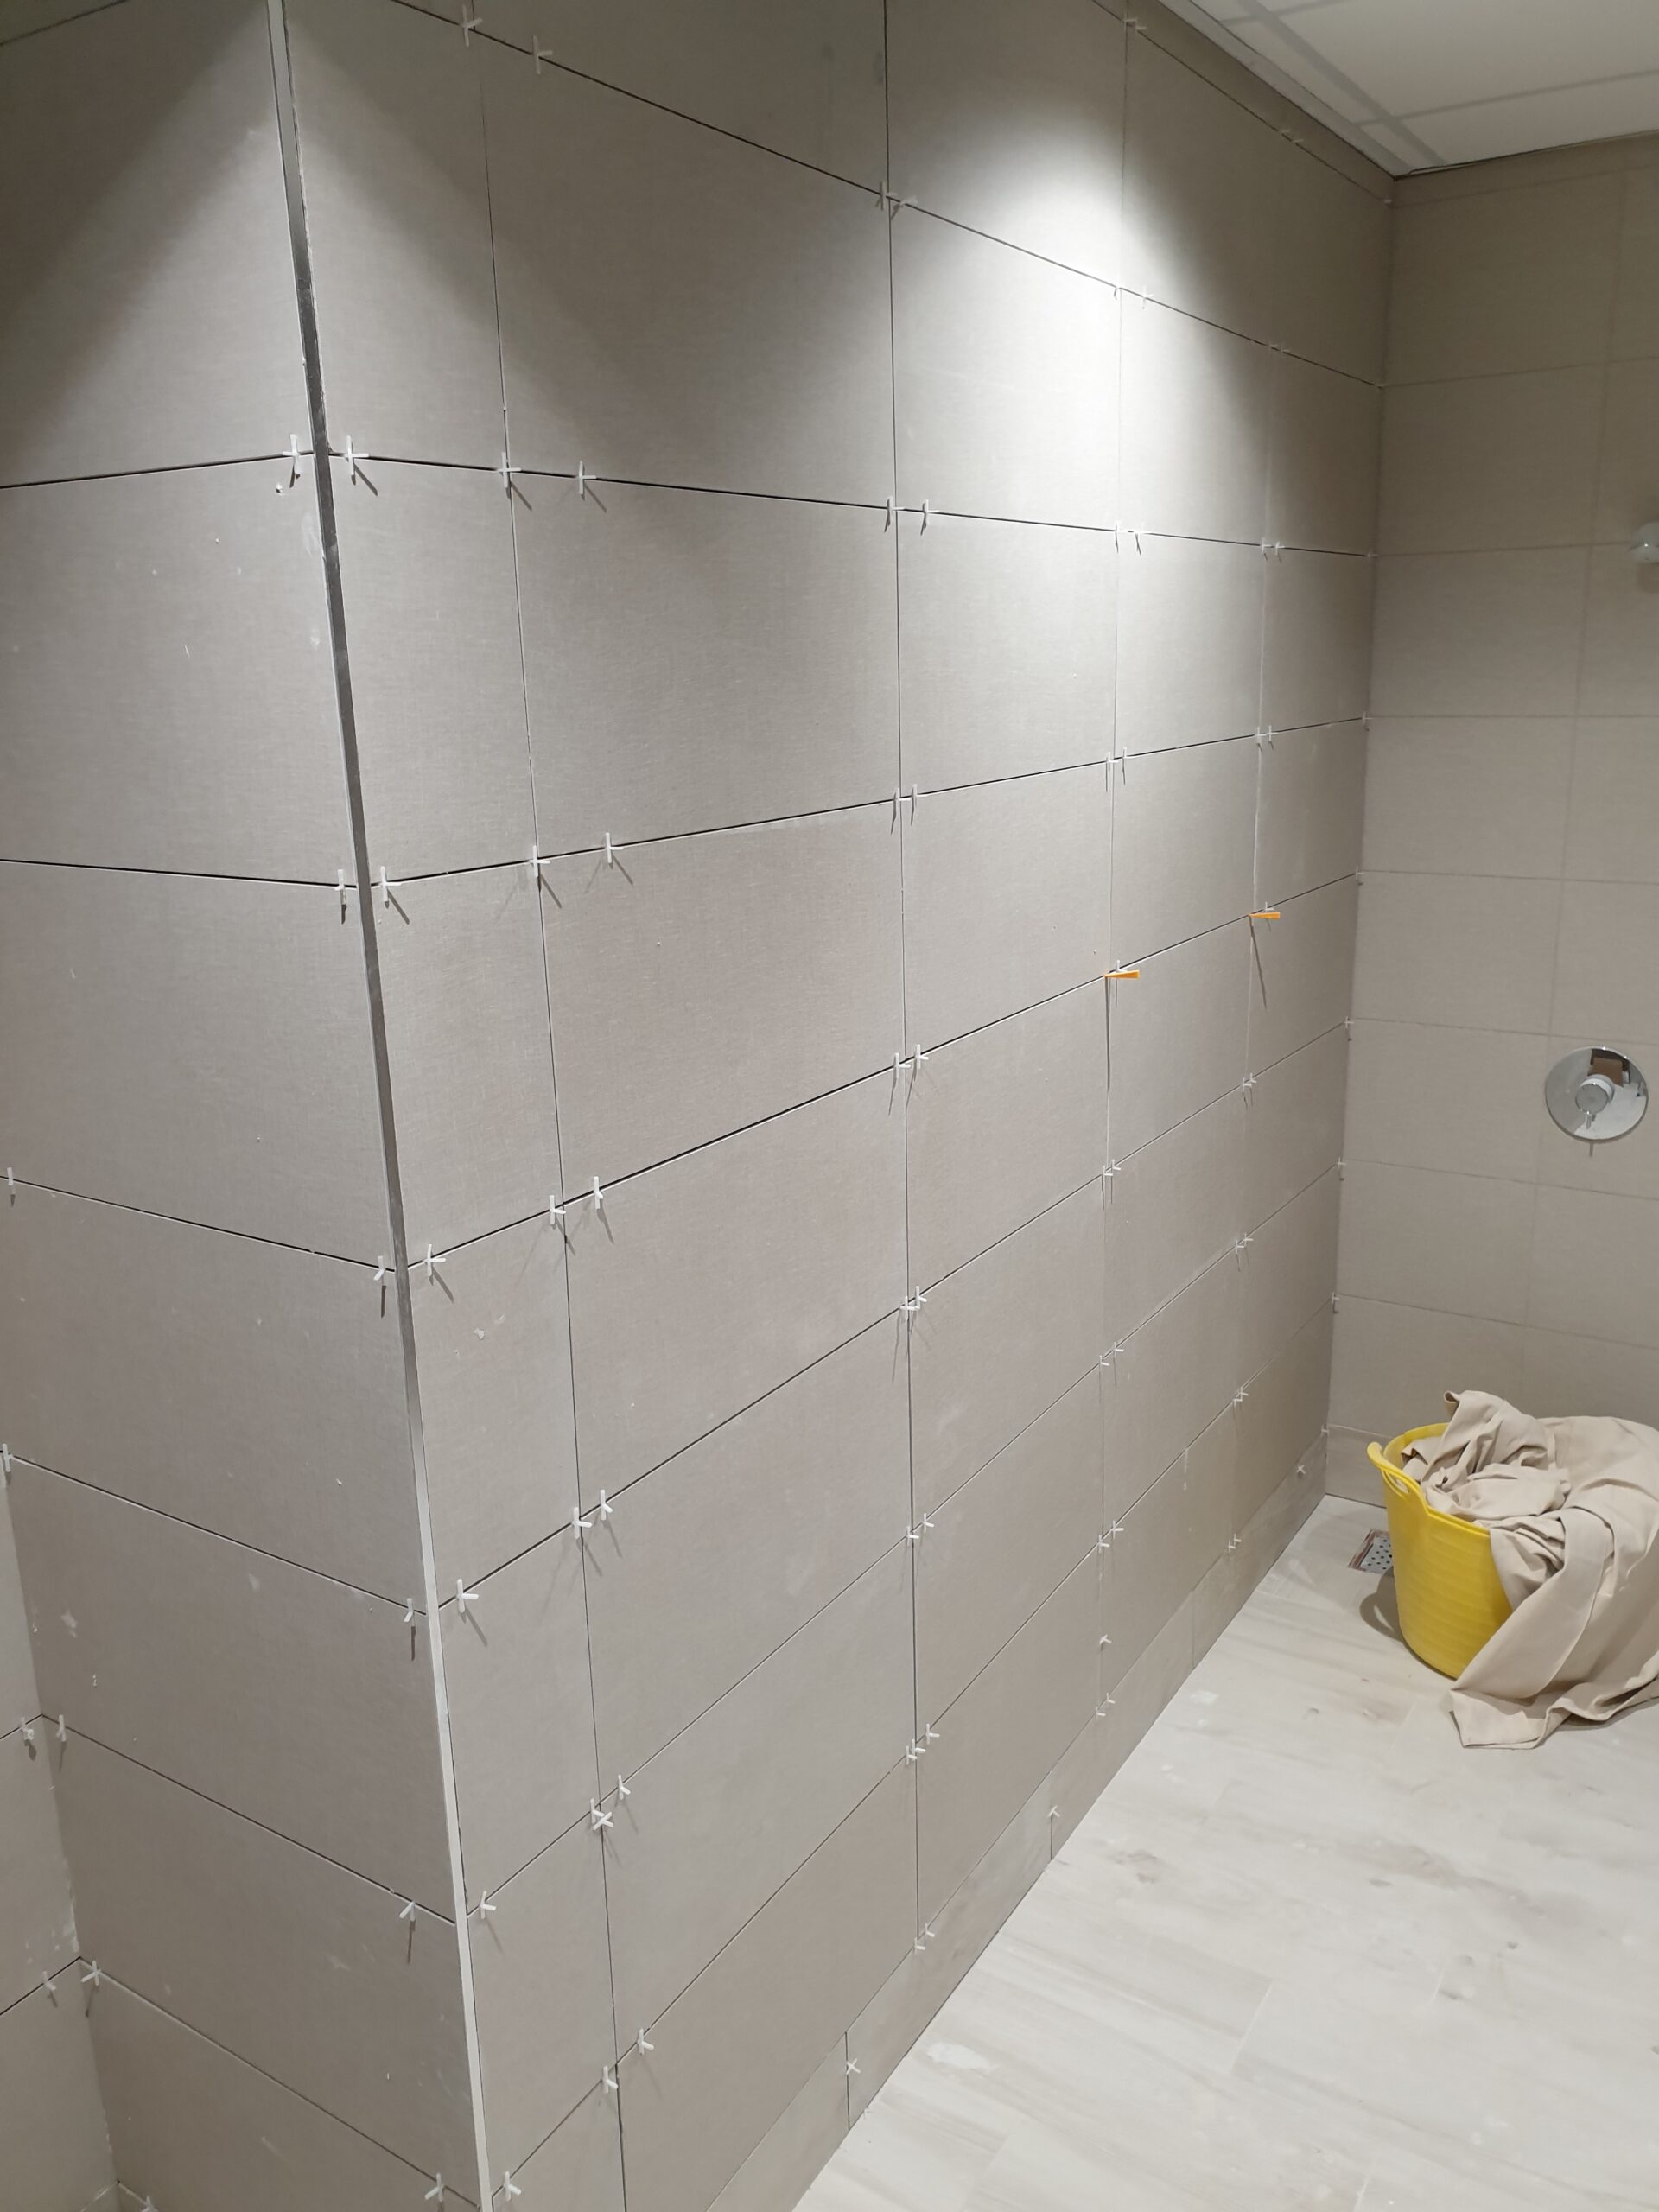 Centre's SPA - Changing Room tiling